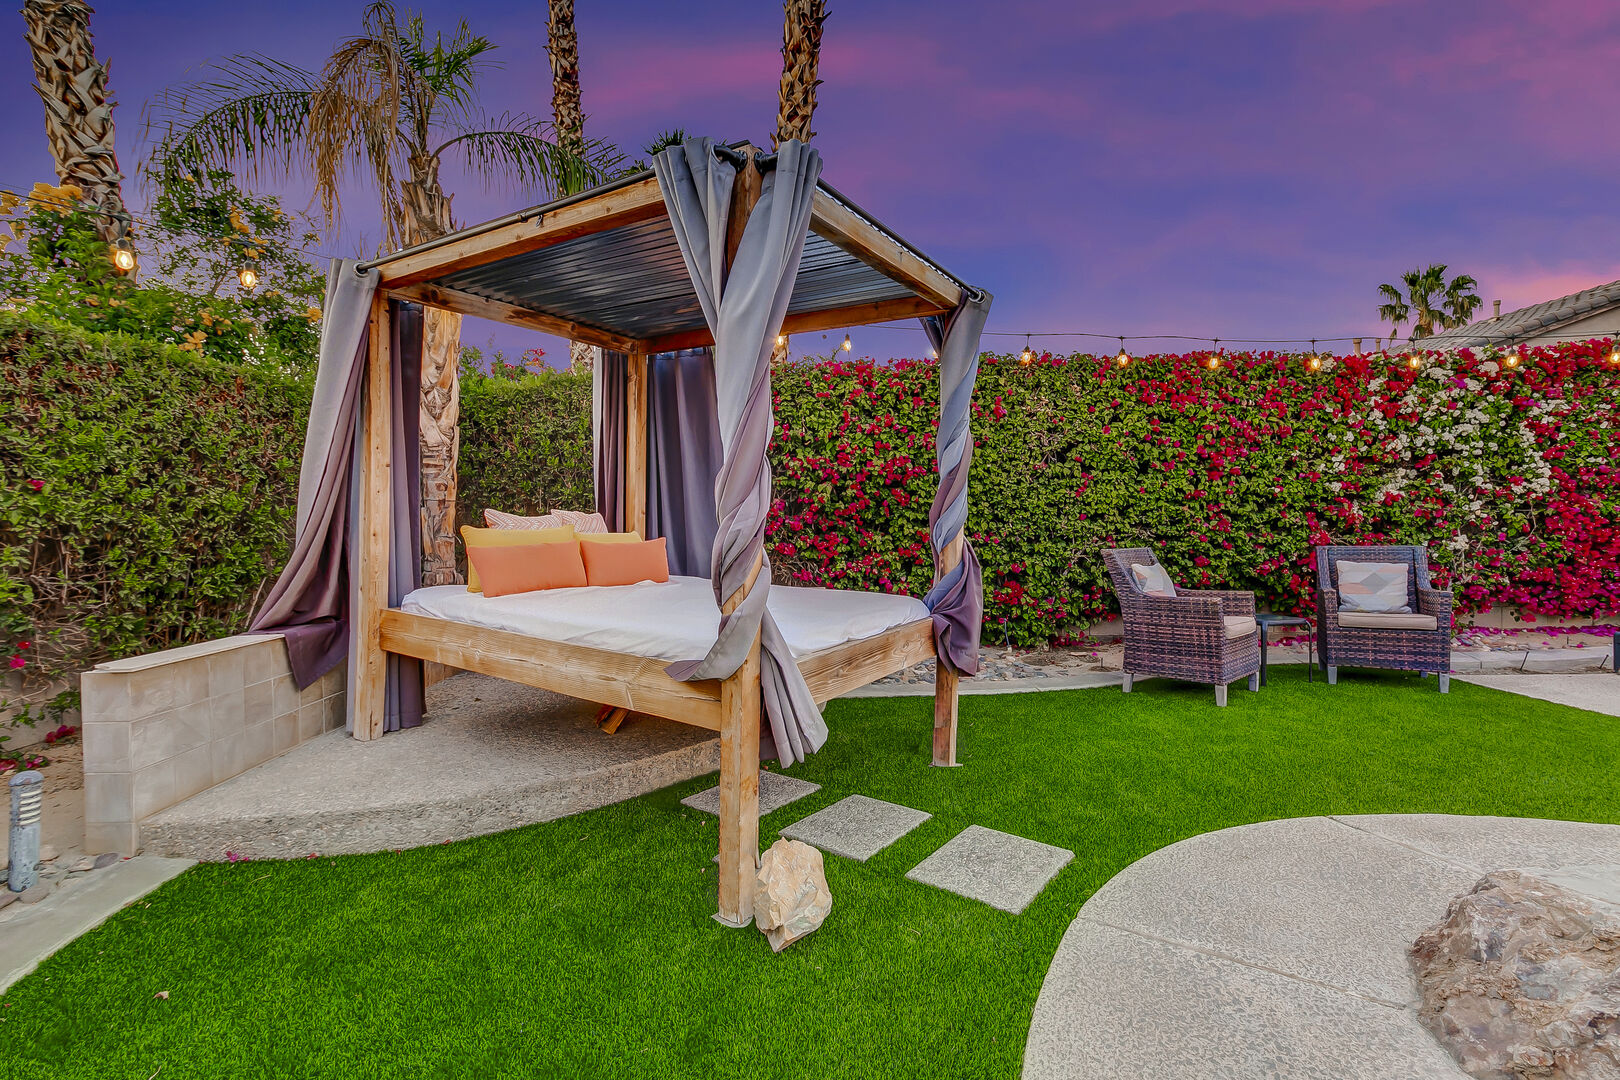 This resort style cabana will have you feeling like you're in paradise.